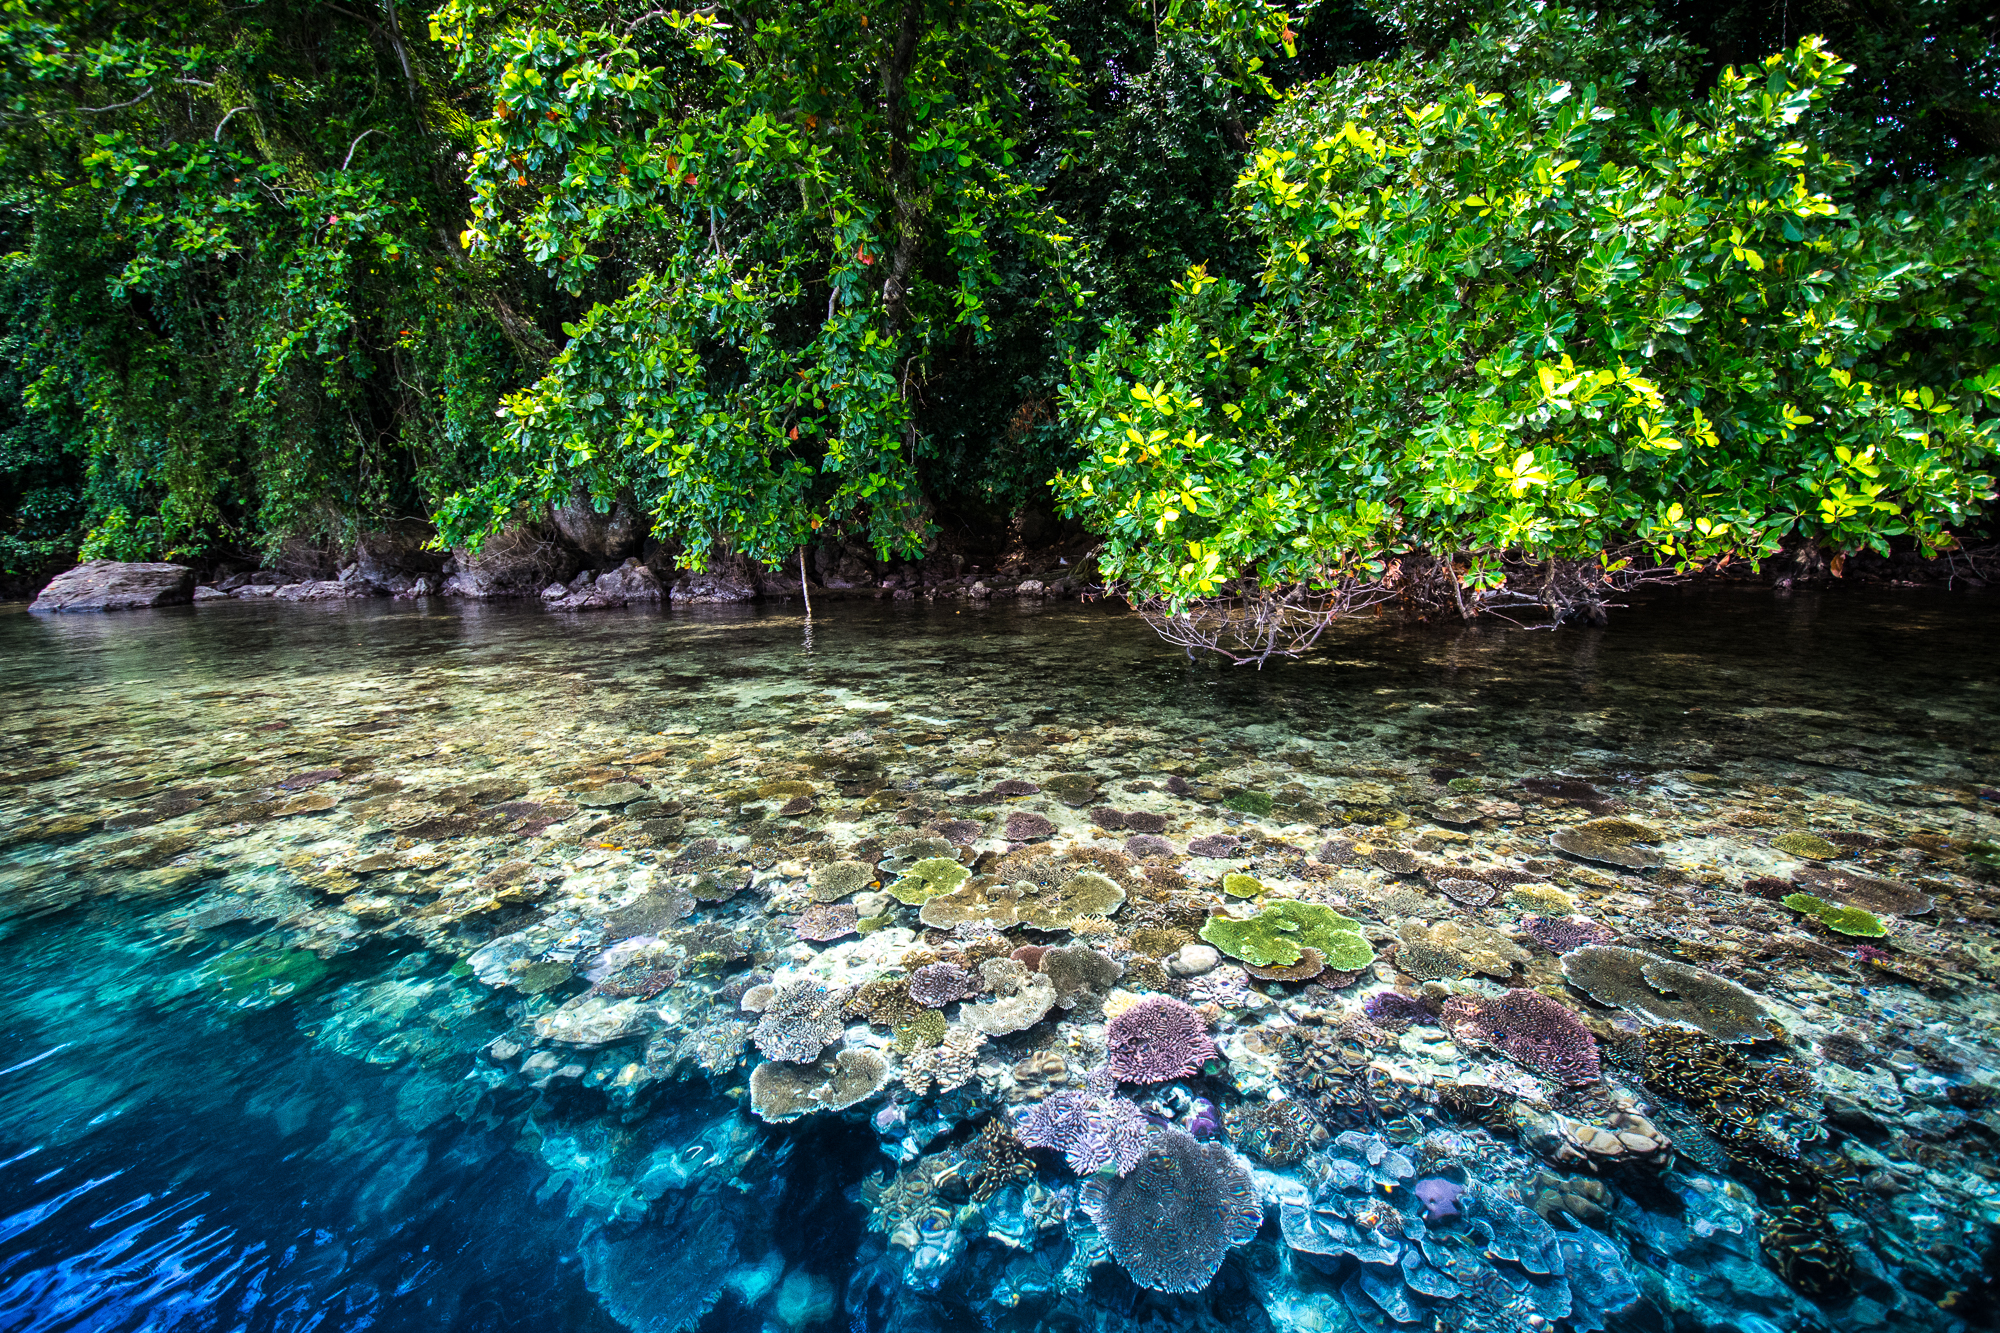 Papua New Guinea reef and mangroves